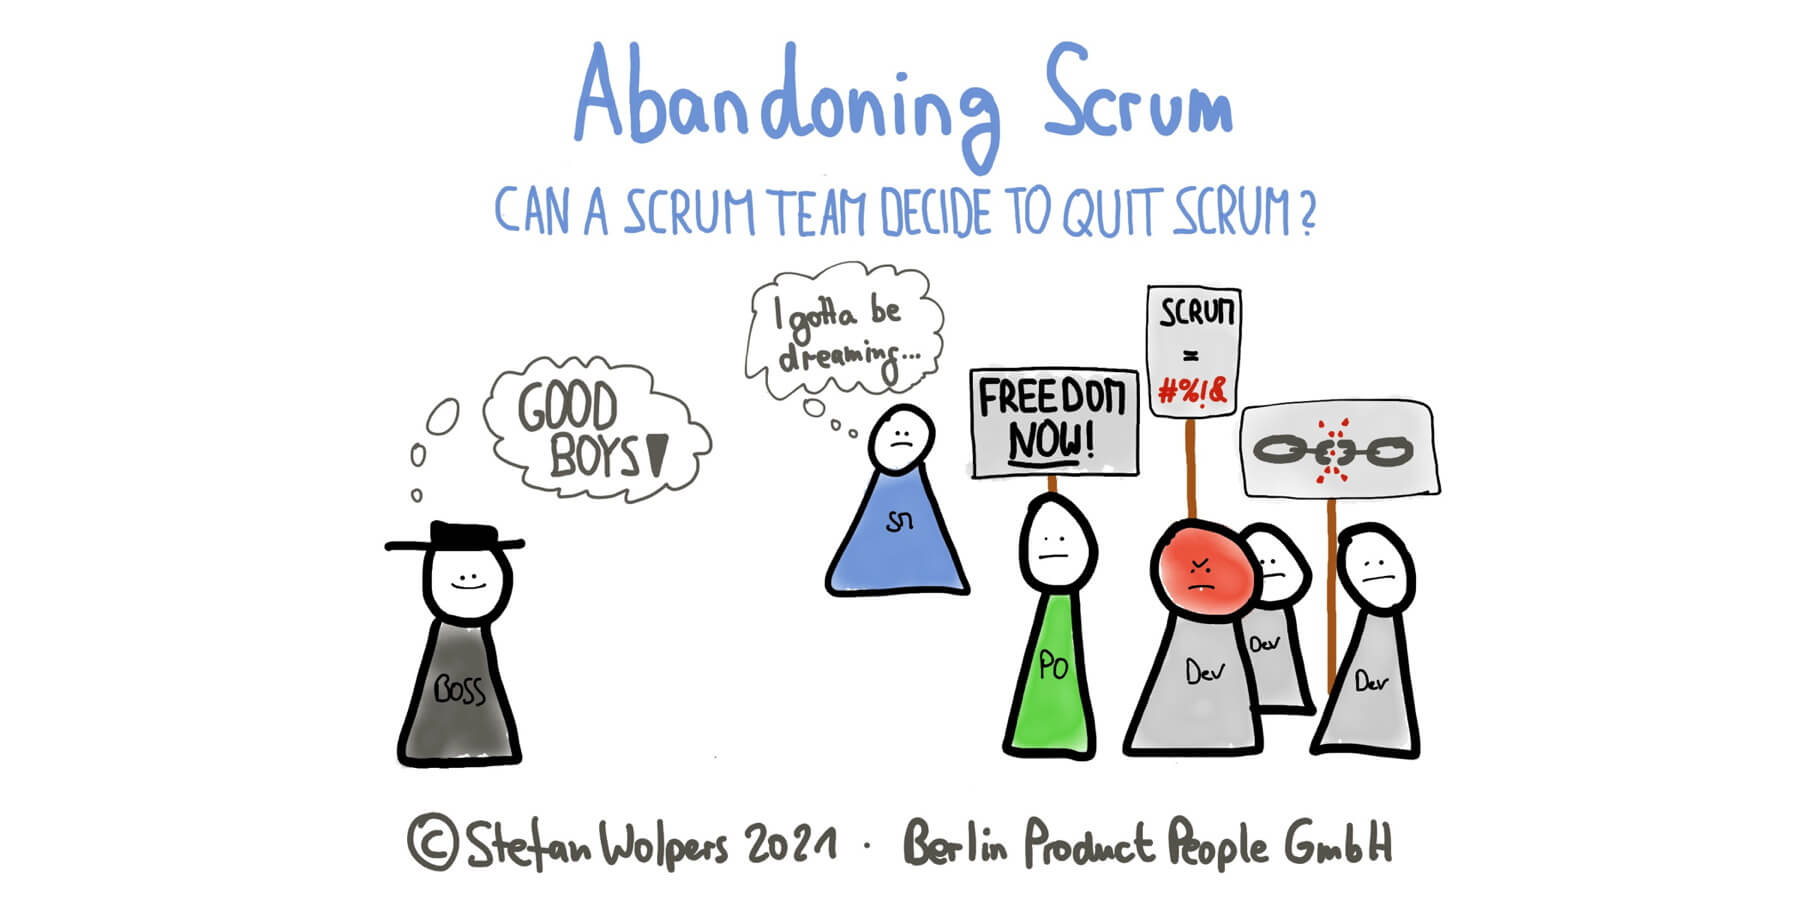 Abandoning Scrum: Can a Scrum Team Decide to Quit Scrum? Berlin Product People GmbH